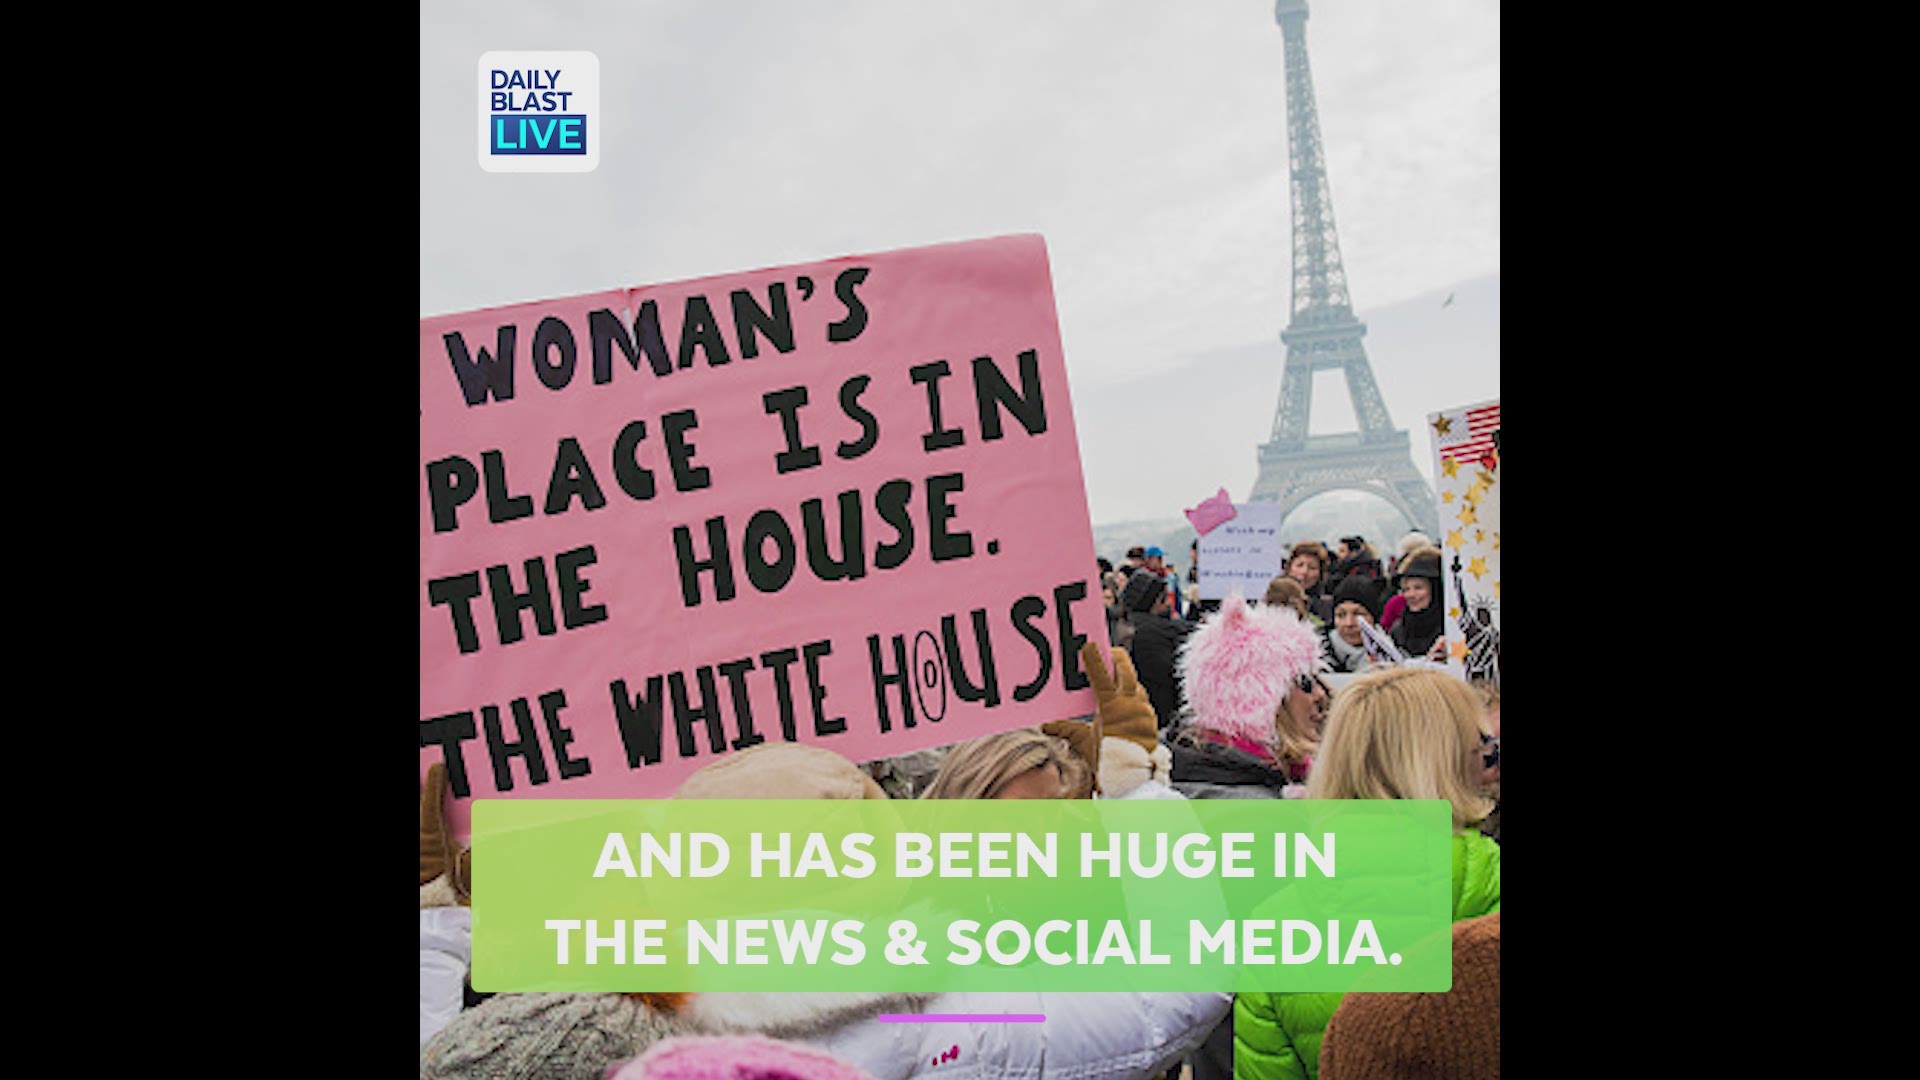 "Feminism" has exploded in the news & social media -- and now it's the word of the year.